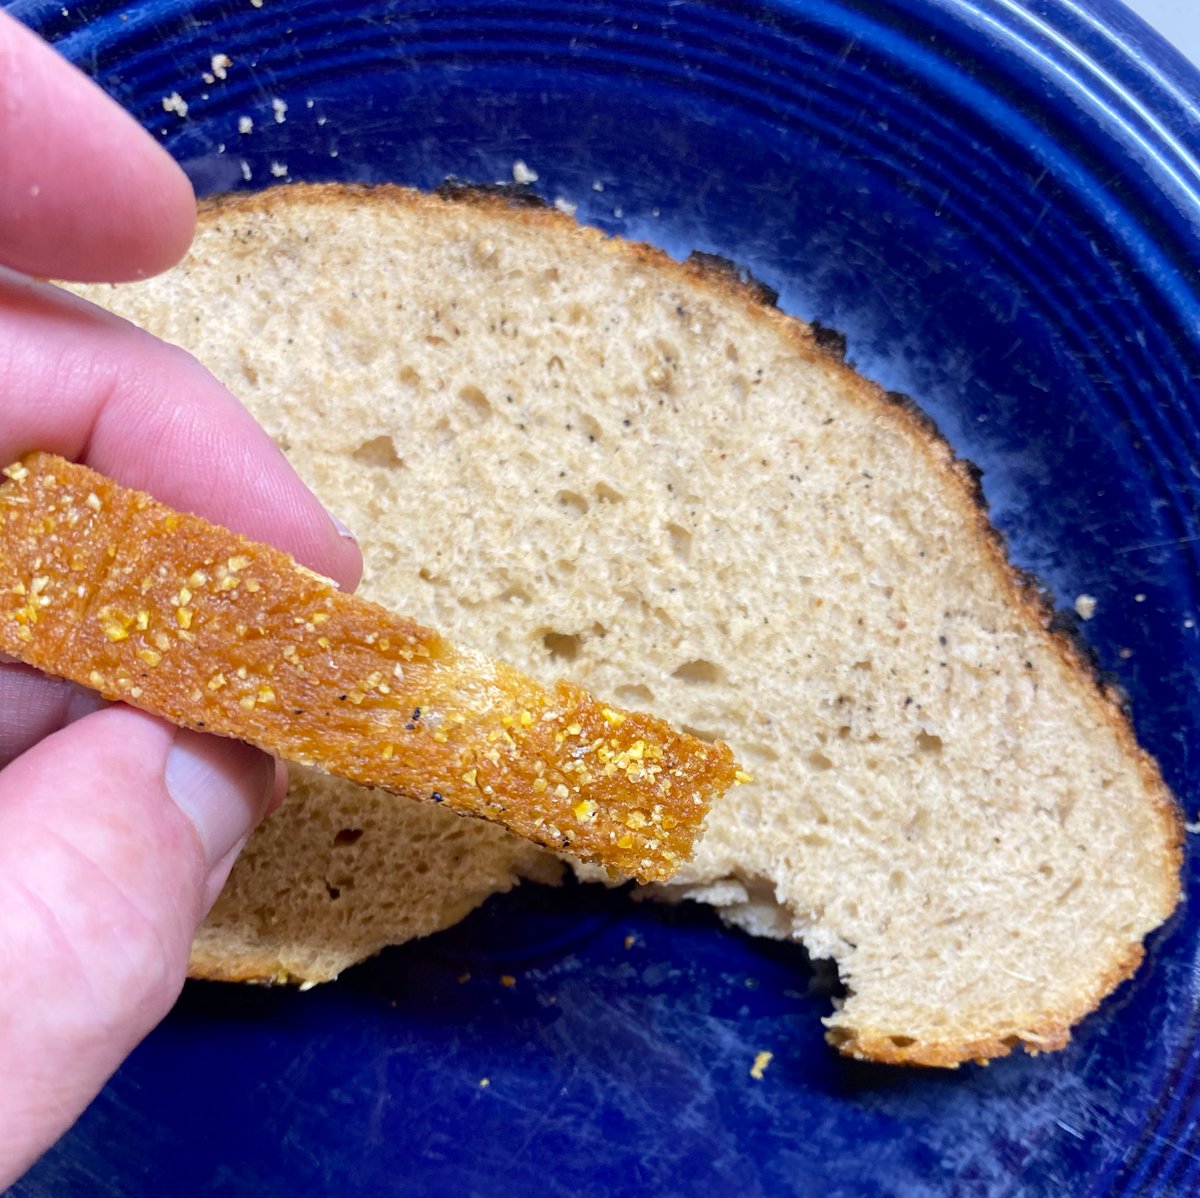 Today I achieved* something that I’ve been trying to do for a year. The slice of bread here was made with leavening cultures sampled from ancient Egyptian baking vessels, using ancient Emmer wheat, with an ancient Egyptian recipe, using ancient Egyptian baking tools, and NO OVEN.